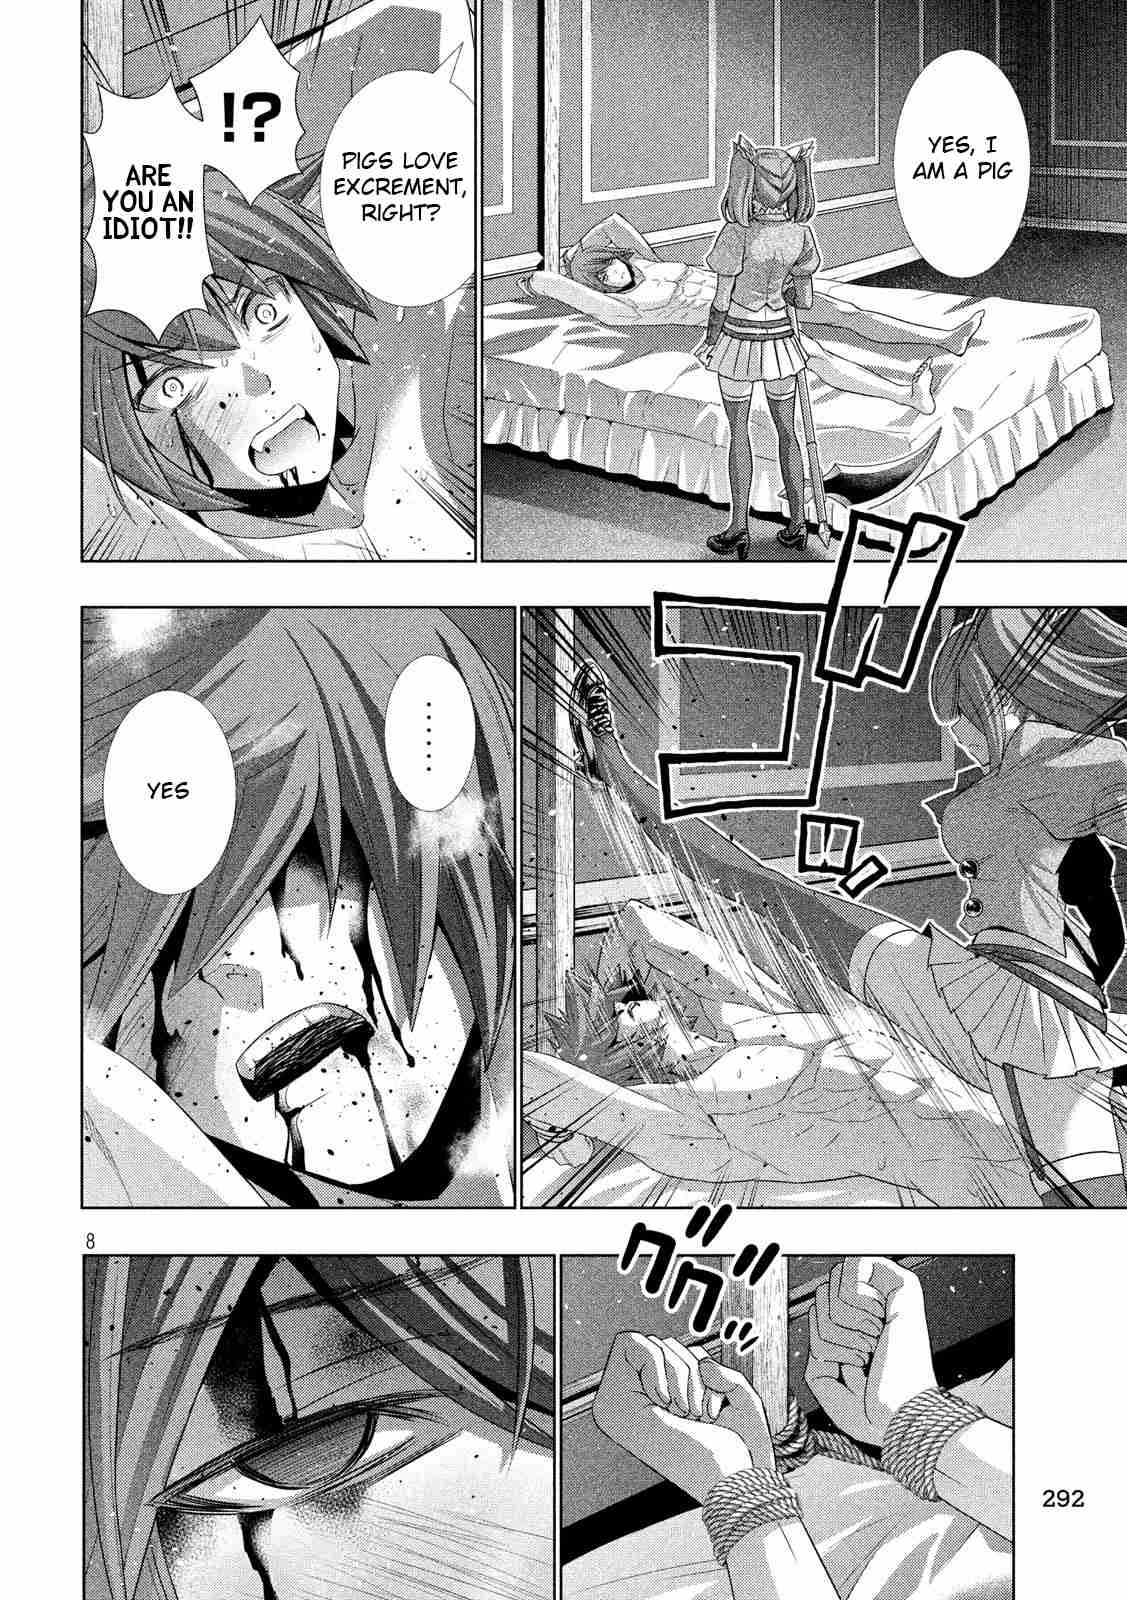 Parallel Paradise Ch. 67 Excruciable execution